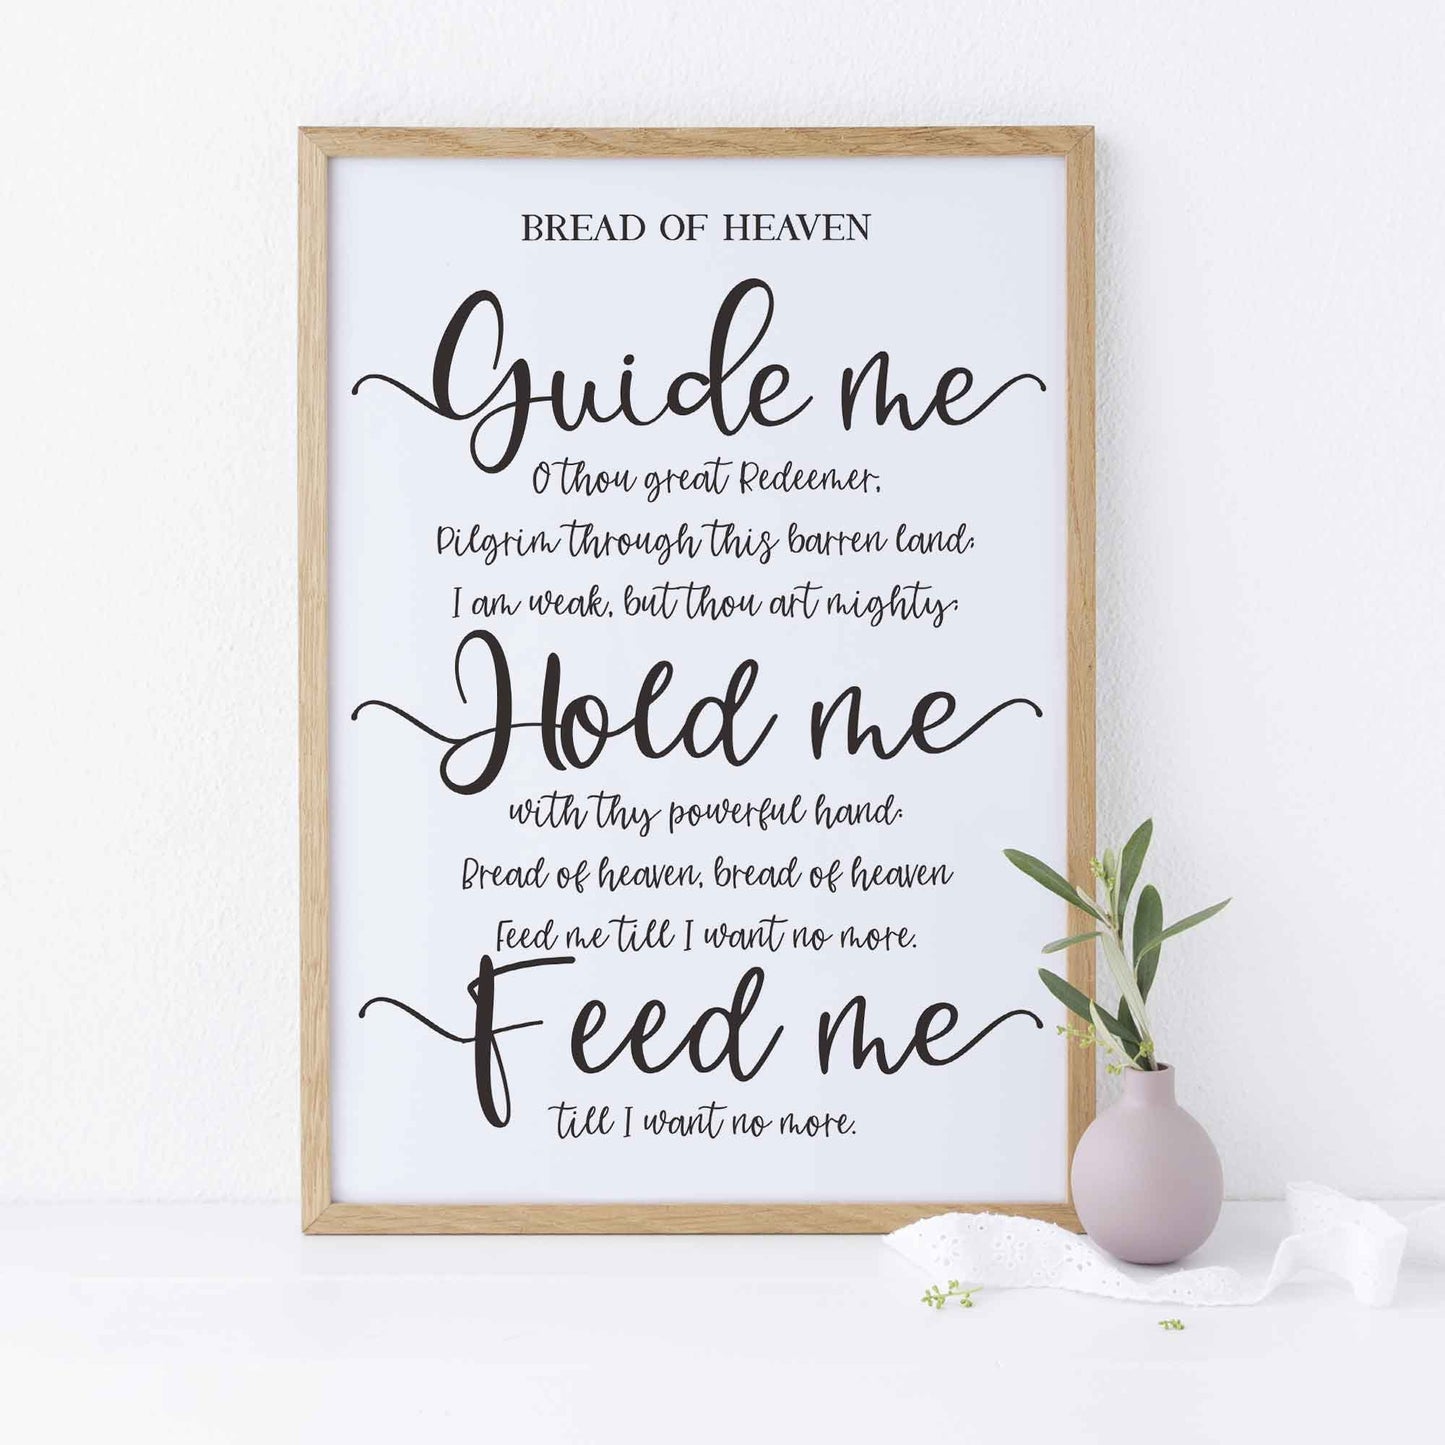 Bread Of Heaven Welsh Rugby Song Lyrics Print